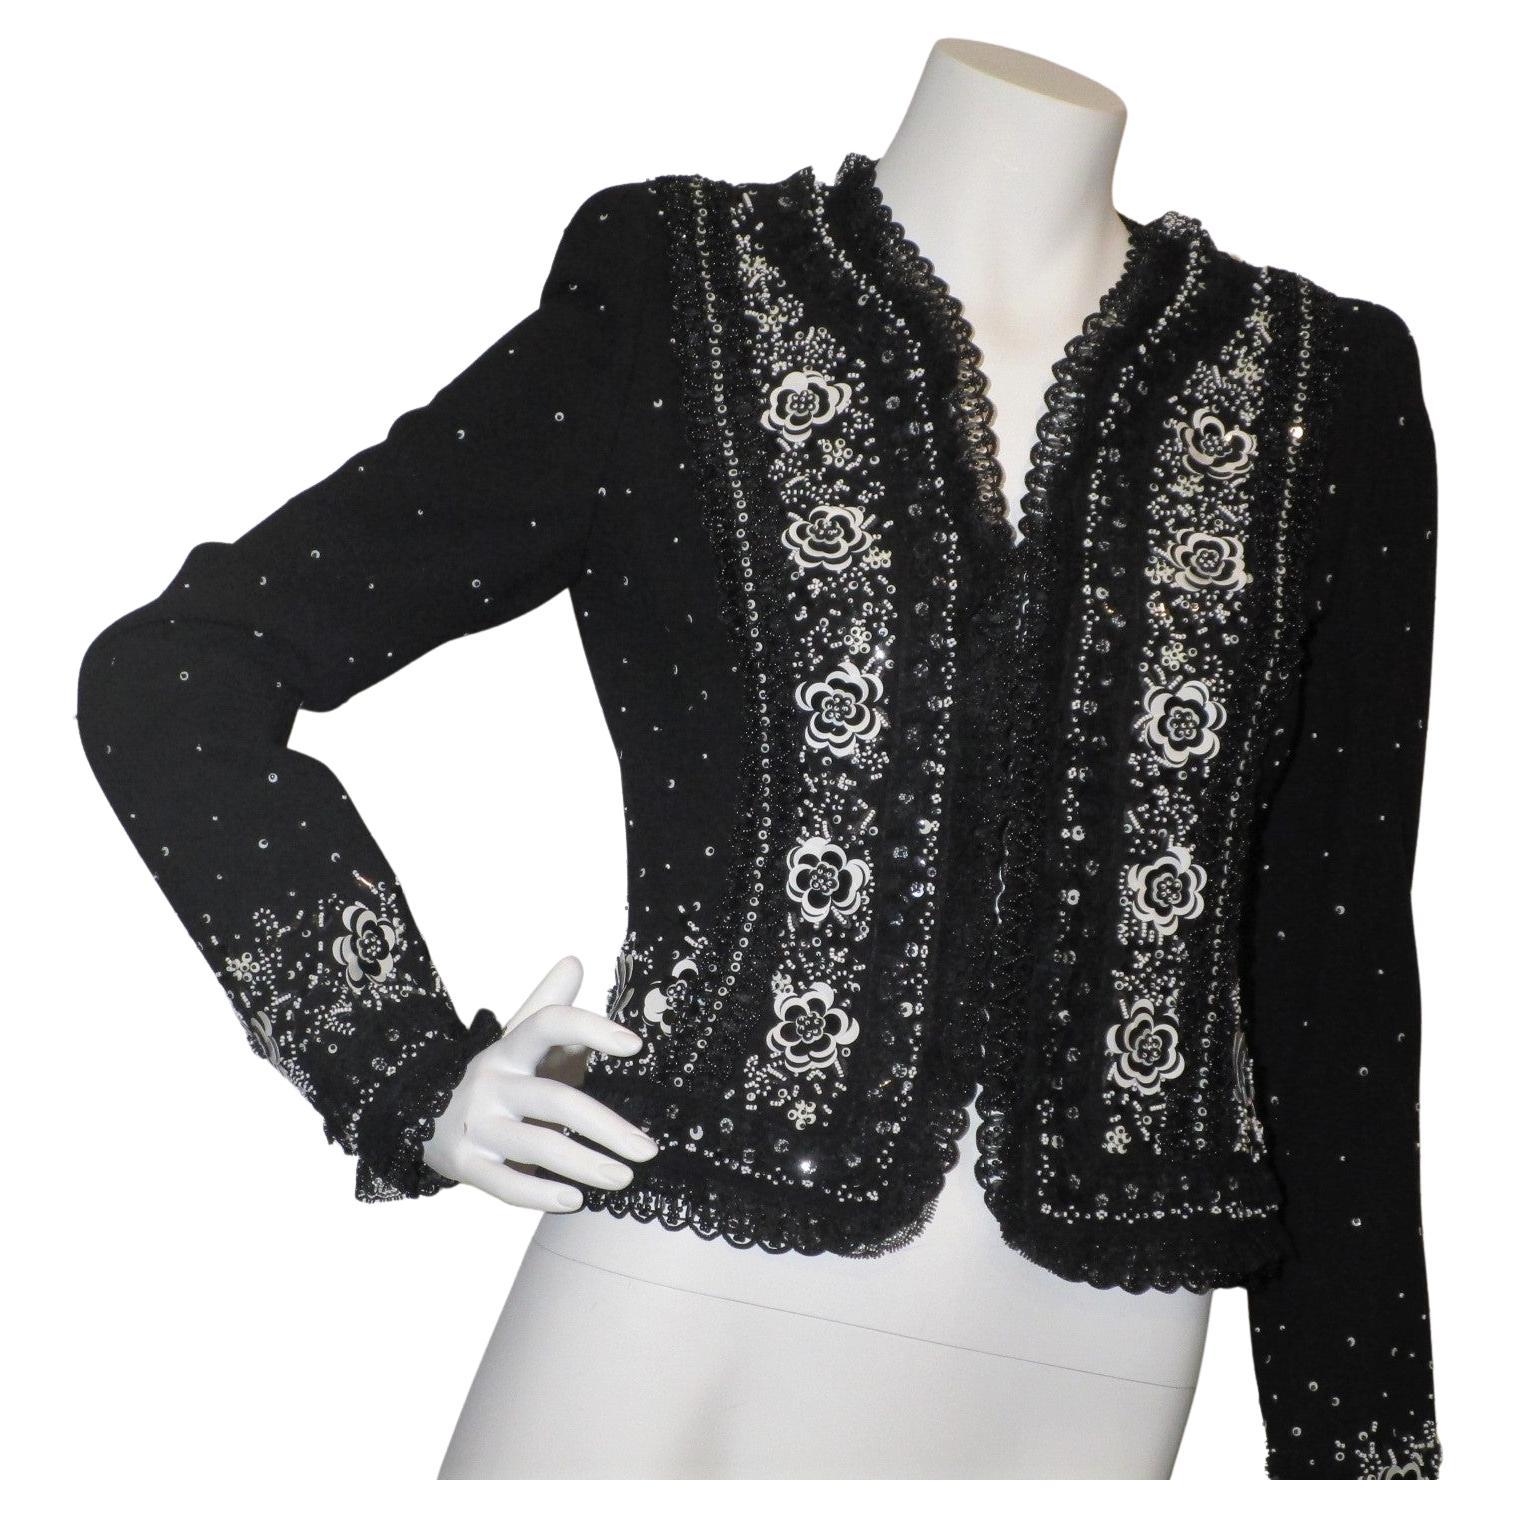 1990s ESCADA Couture Jacket Black & White Beaded Sequin Lace Sz 36 For Sale